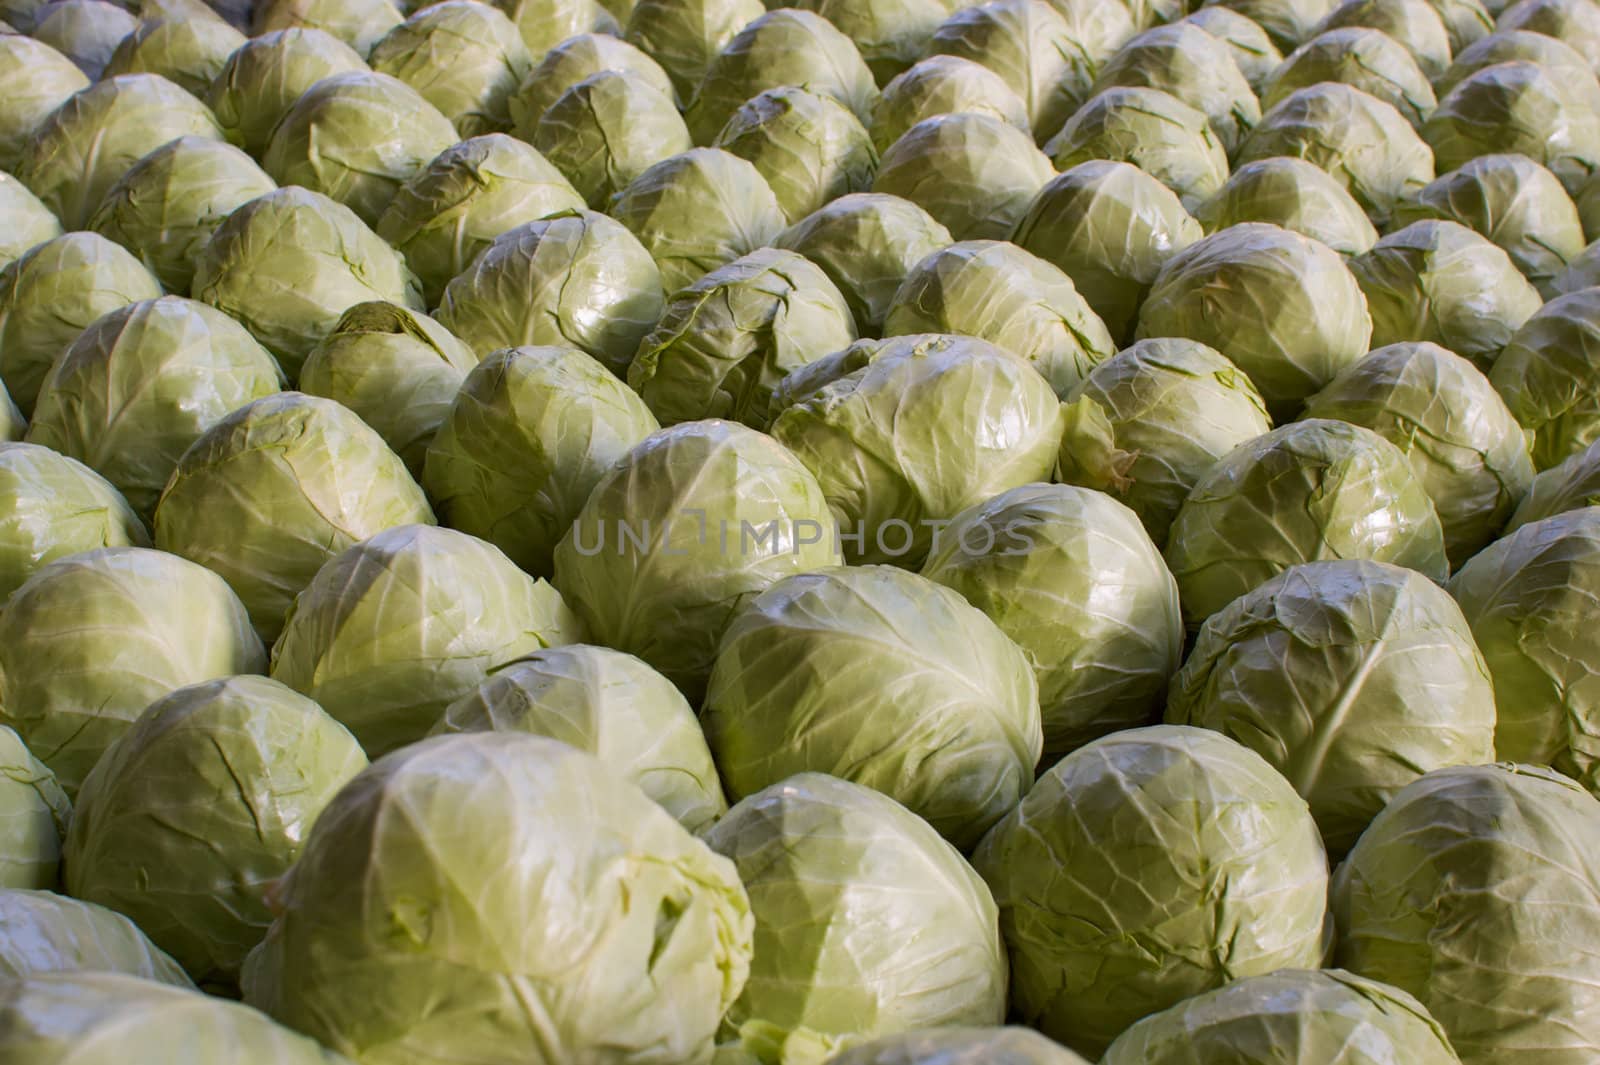 An Army of Cabbages by bobkeenan